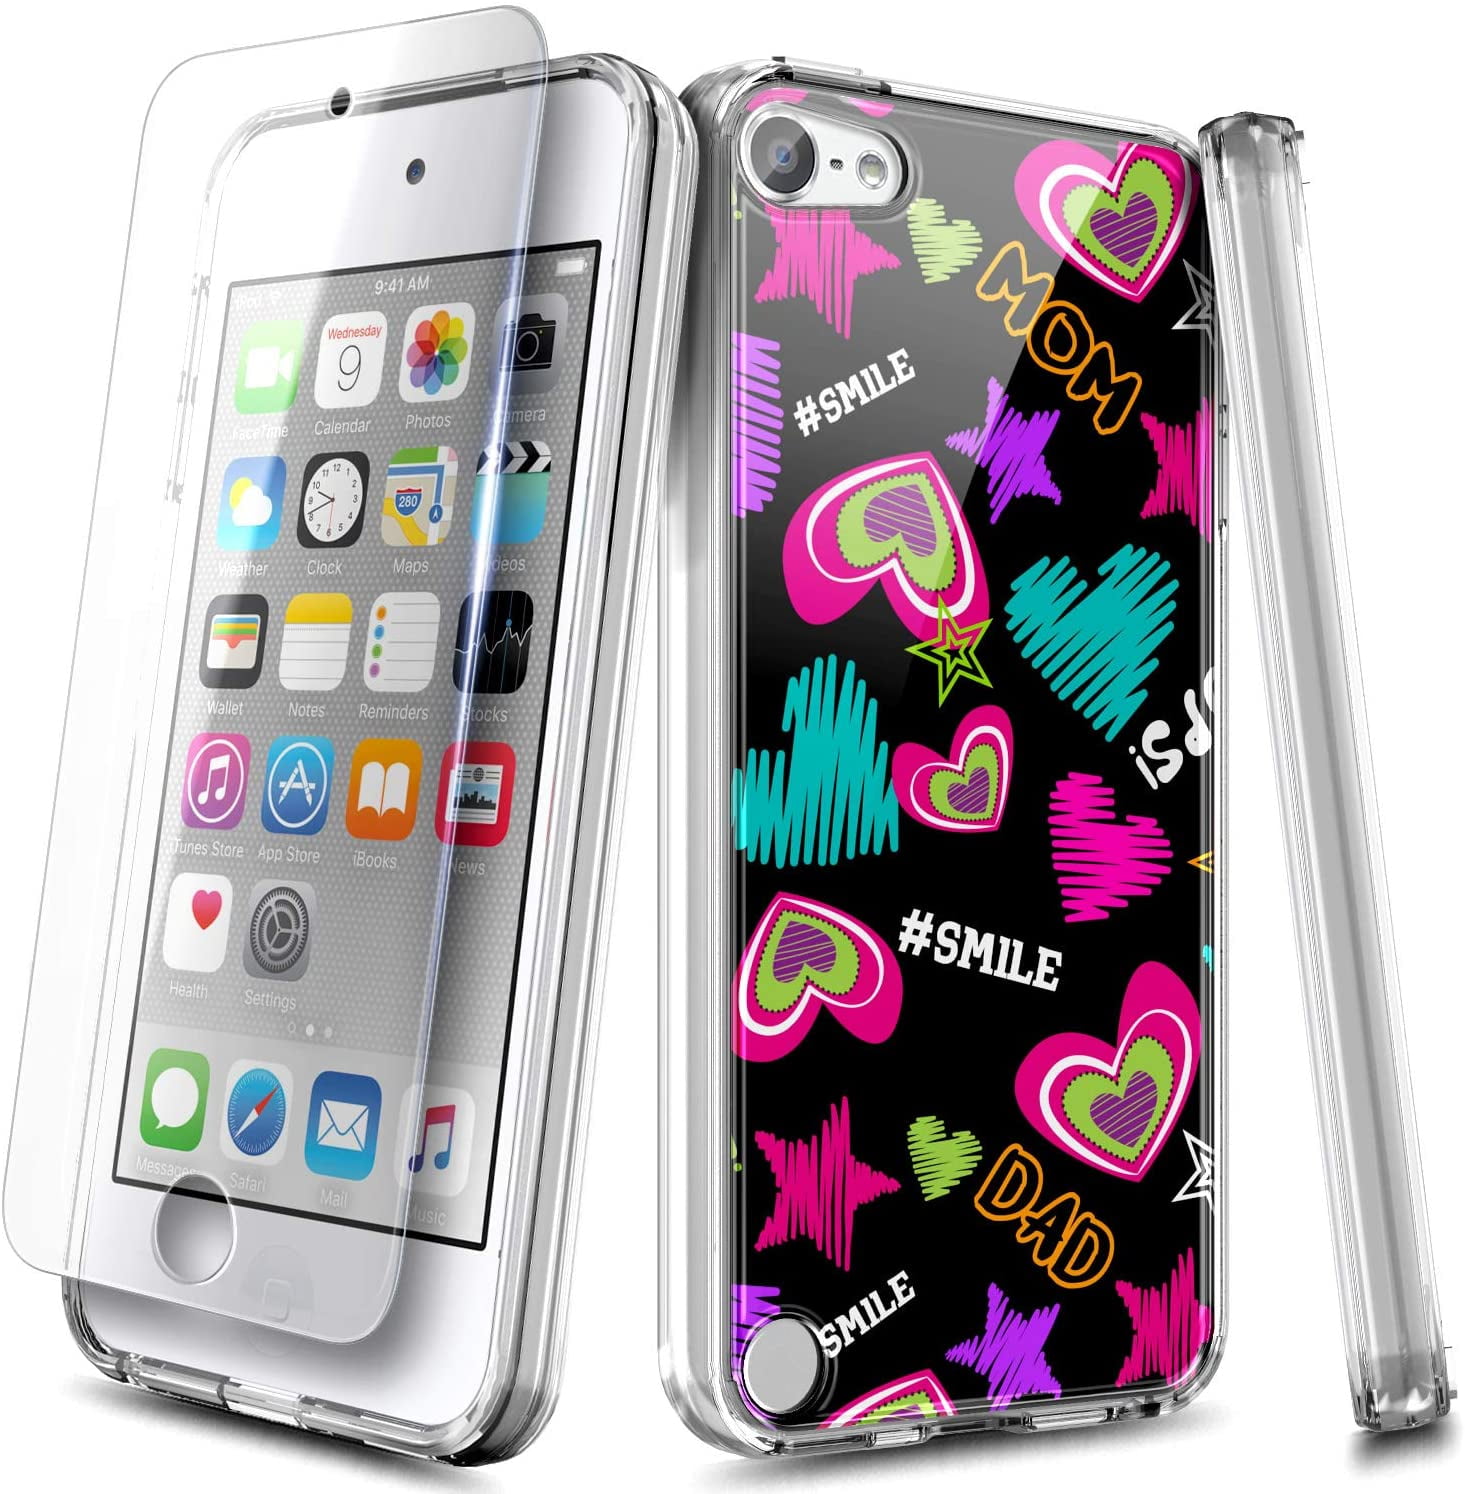 Nagebee Case for iPod Touch 7, iPod Touch 6 5 with Screen Protector ...